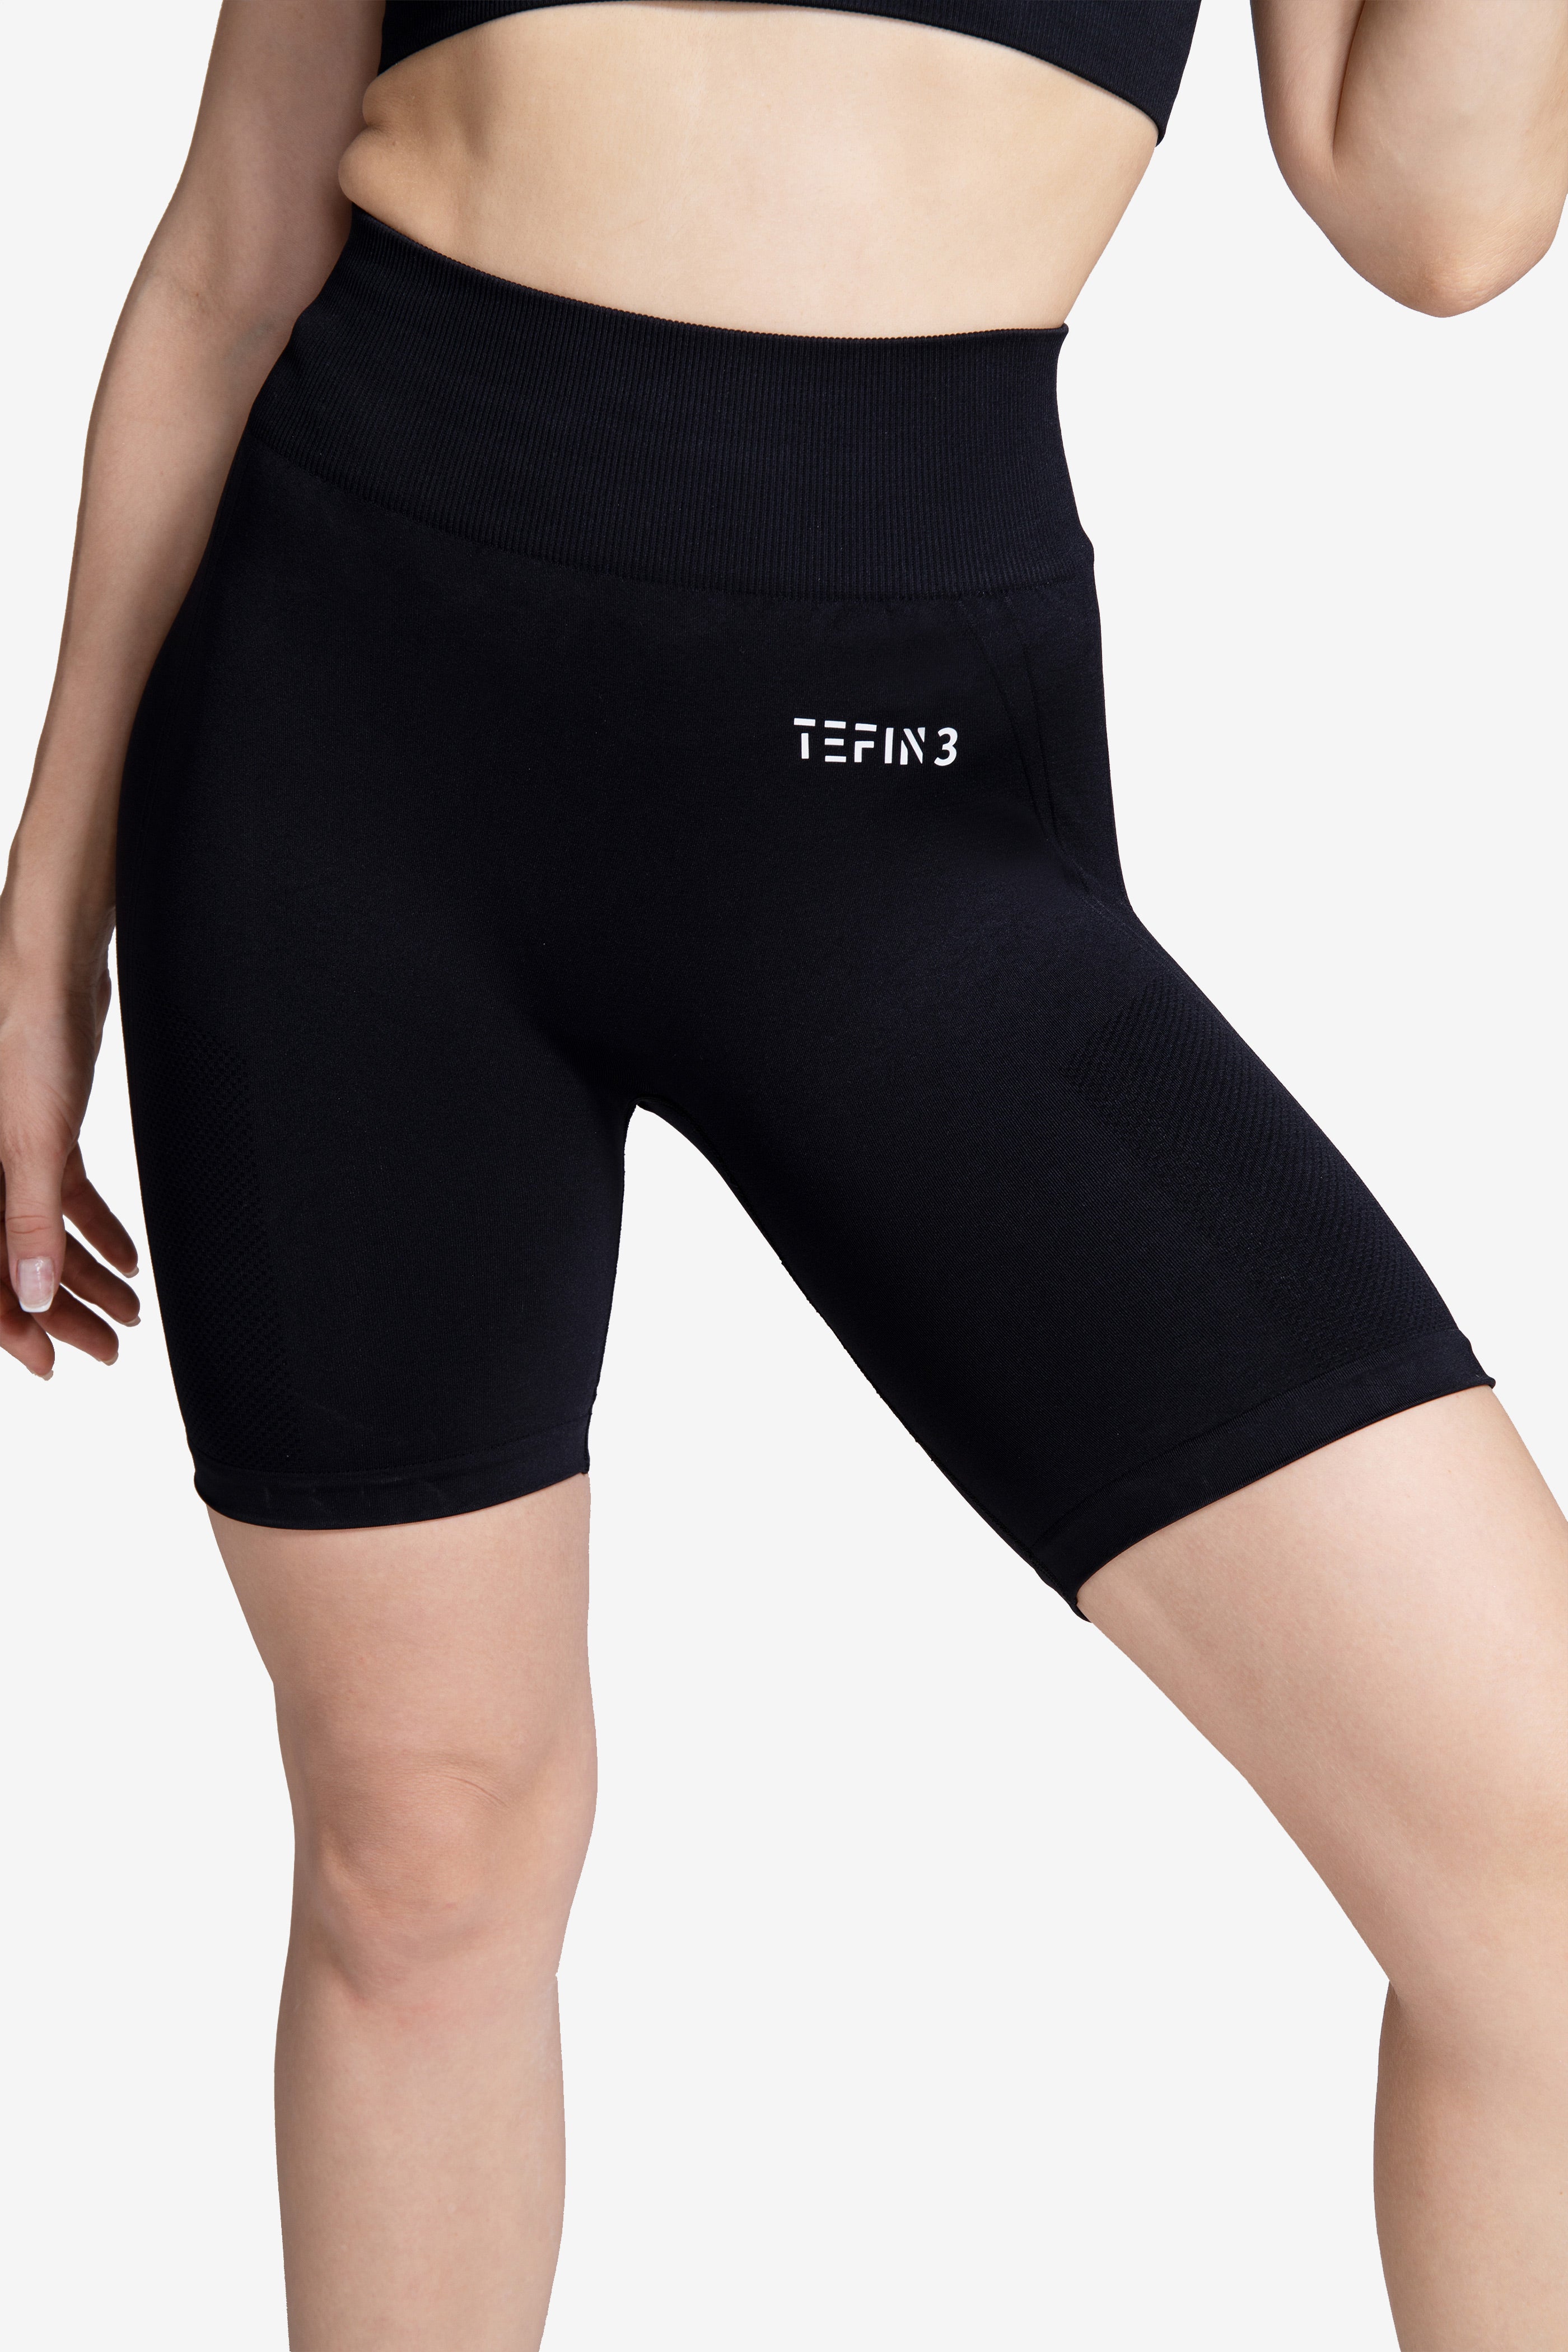 Reamphy 3 Pack Slip Shorts for Women Under Dress,Comfortable Smooth Yoga  Shorts,Workout Biker Shorts,Suitable for Indoor and Outdoor Daily Wear(3*Black,S)  at  Women's Clothing store